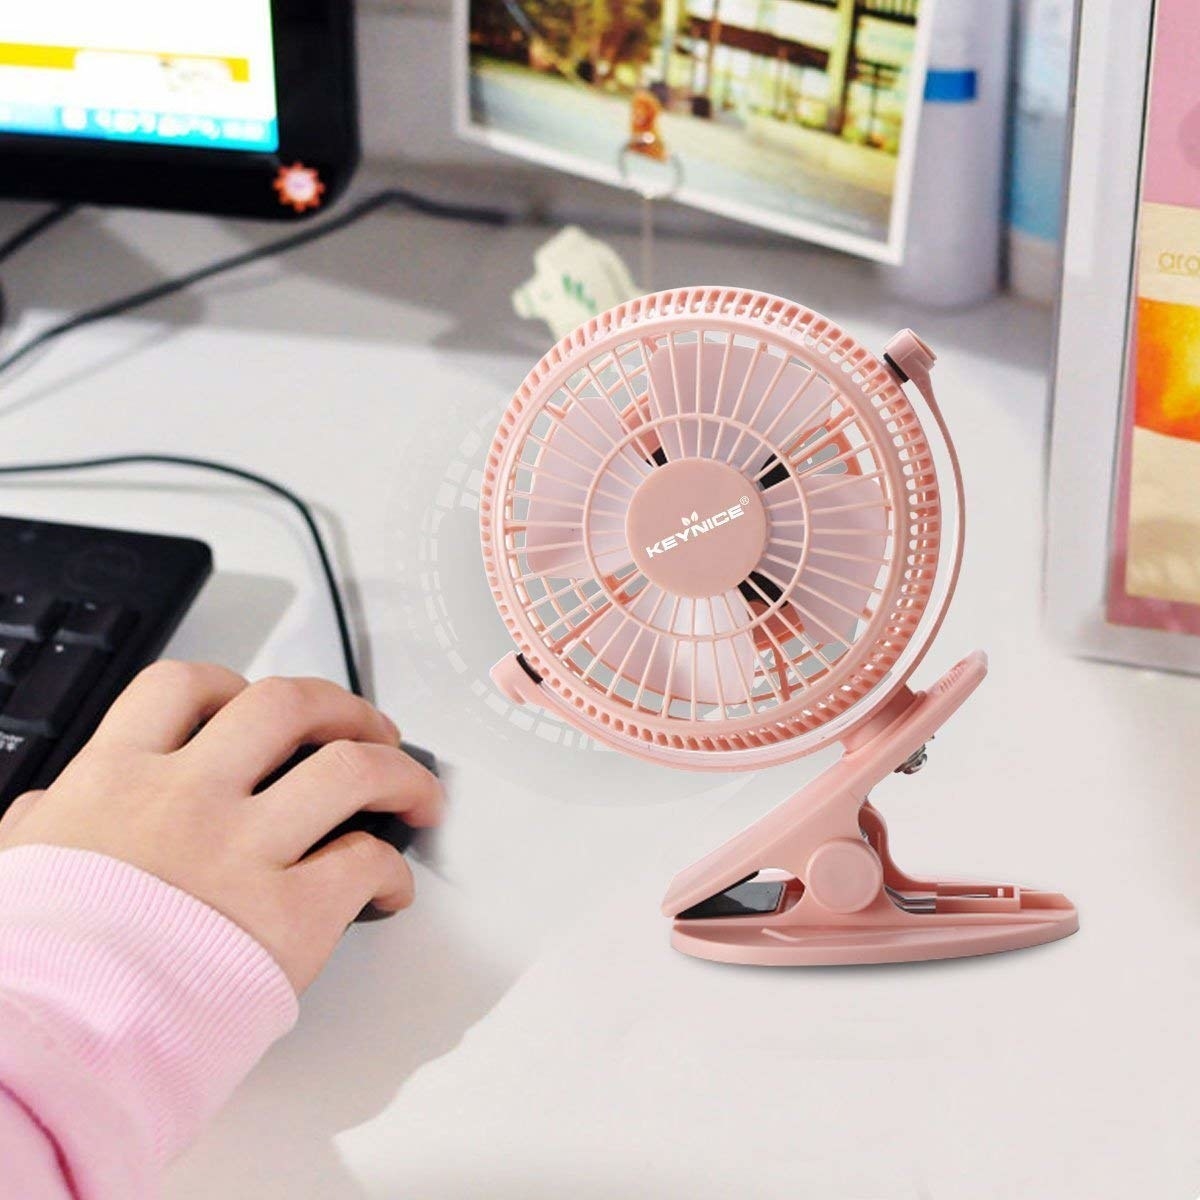 31 Gadgets That'll Make Your Life WAY Easier